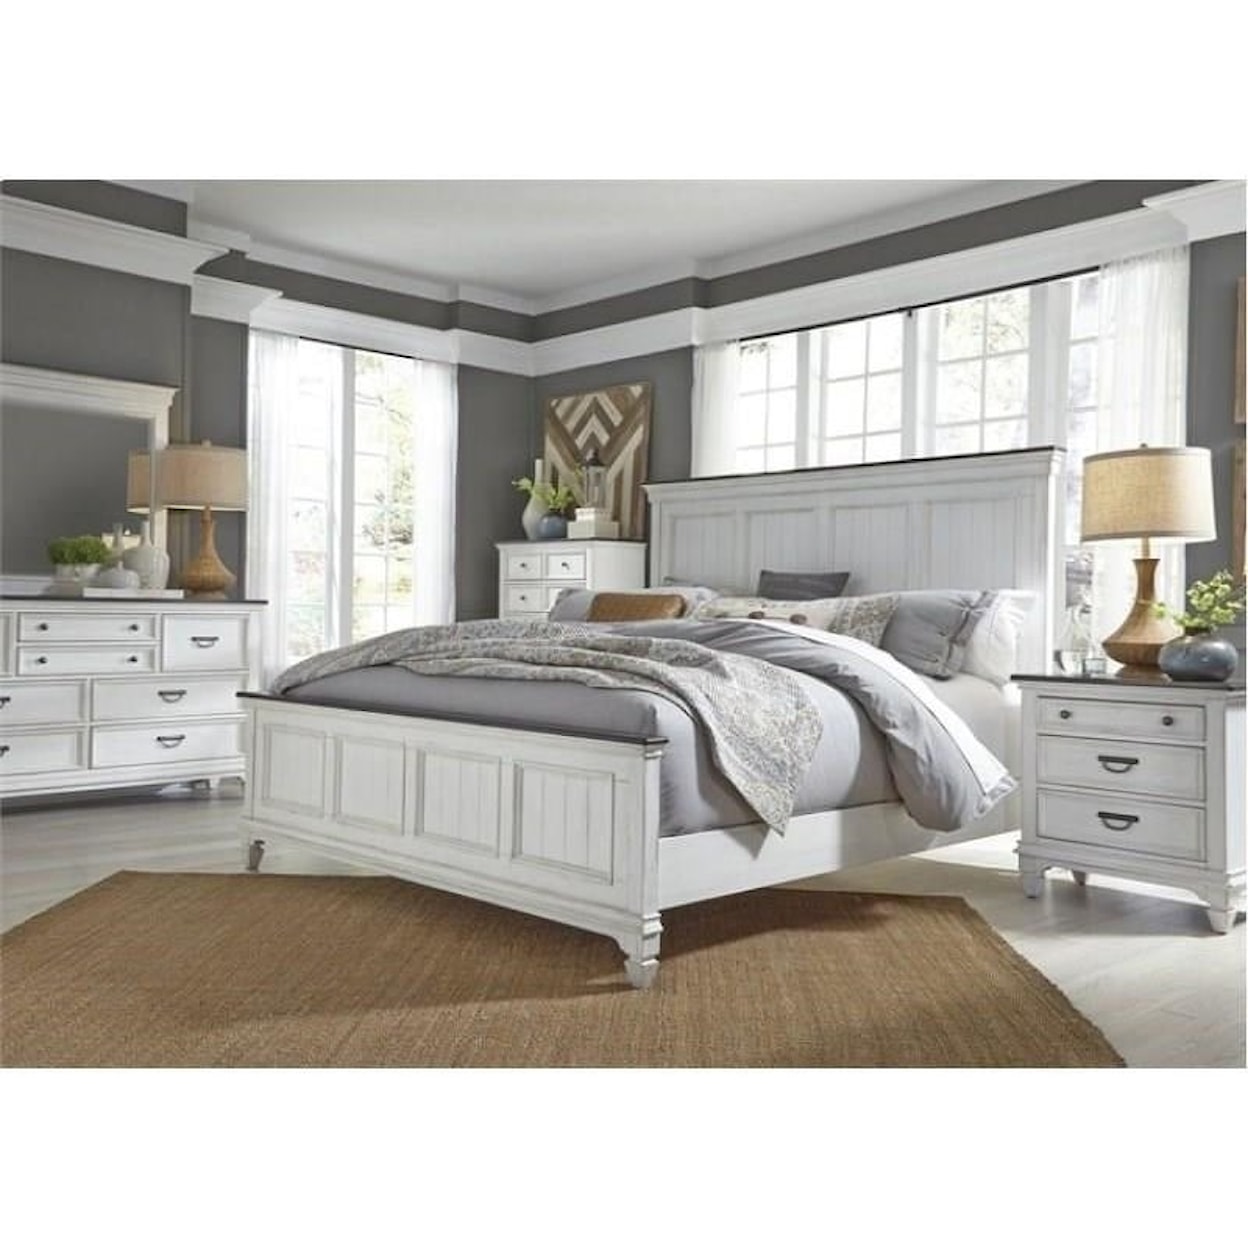 Liberty Furniture Allyson Park 5-Piece King Bedroom Group